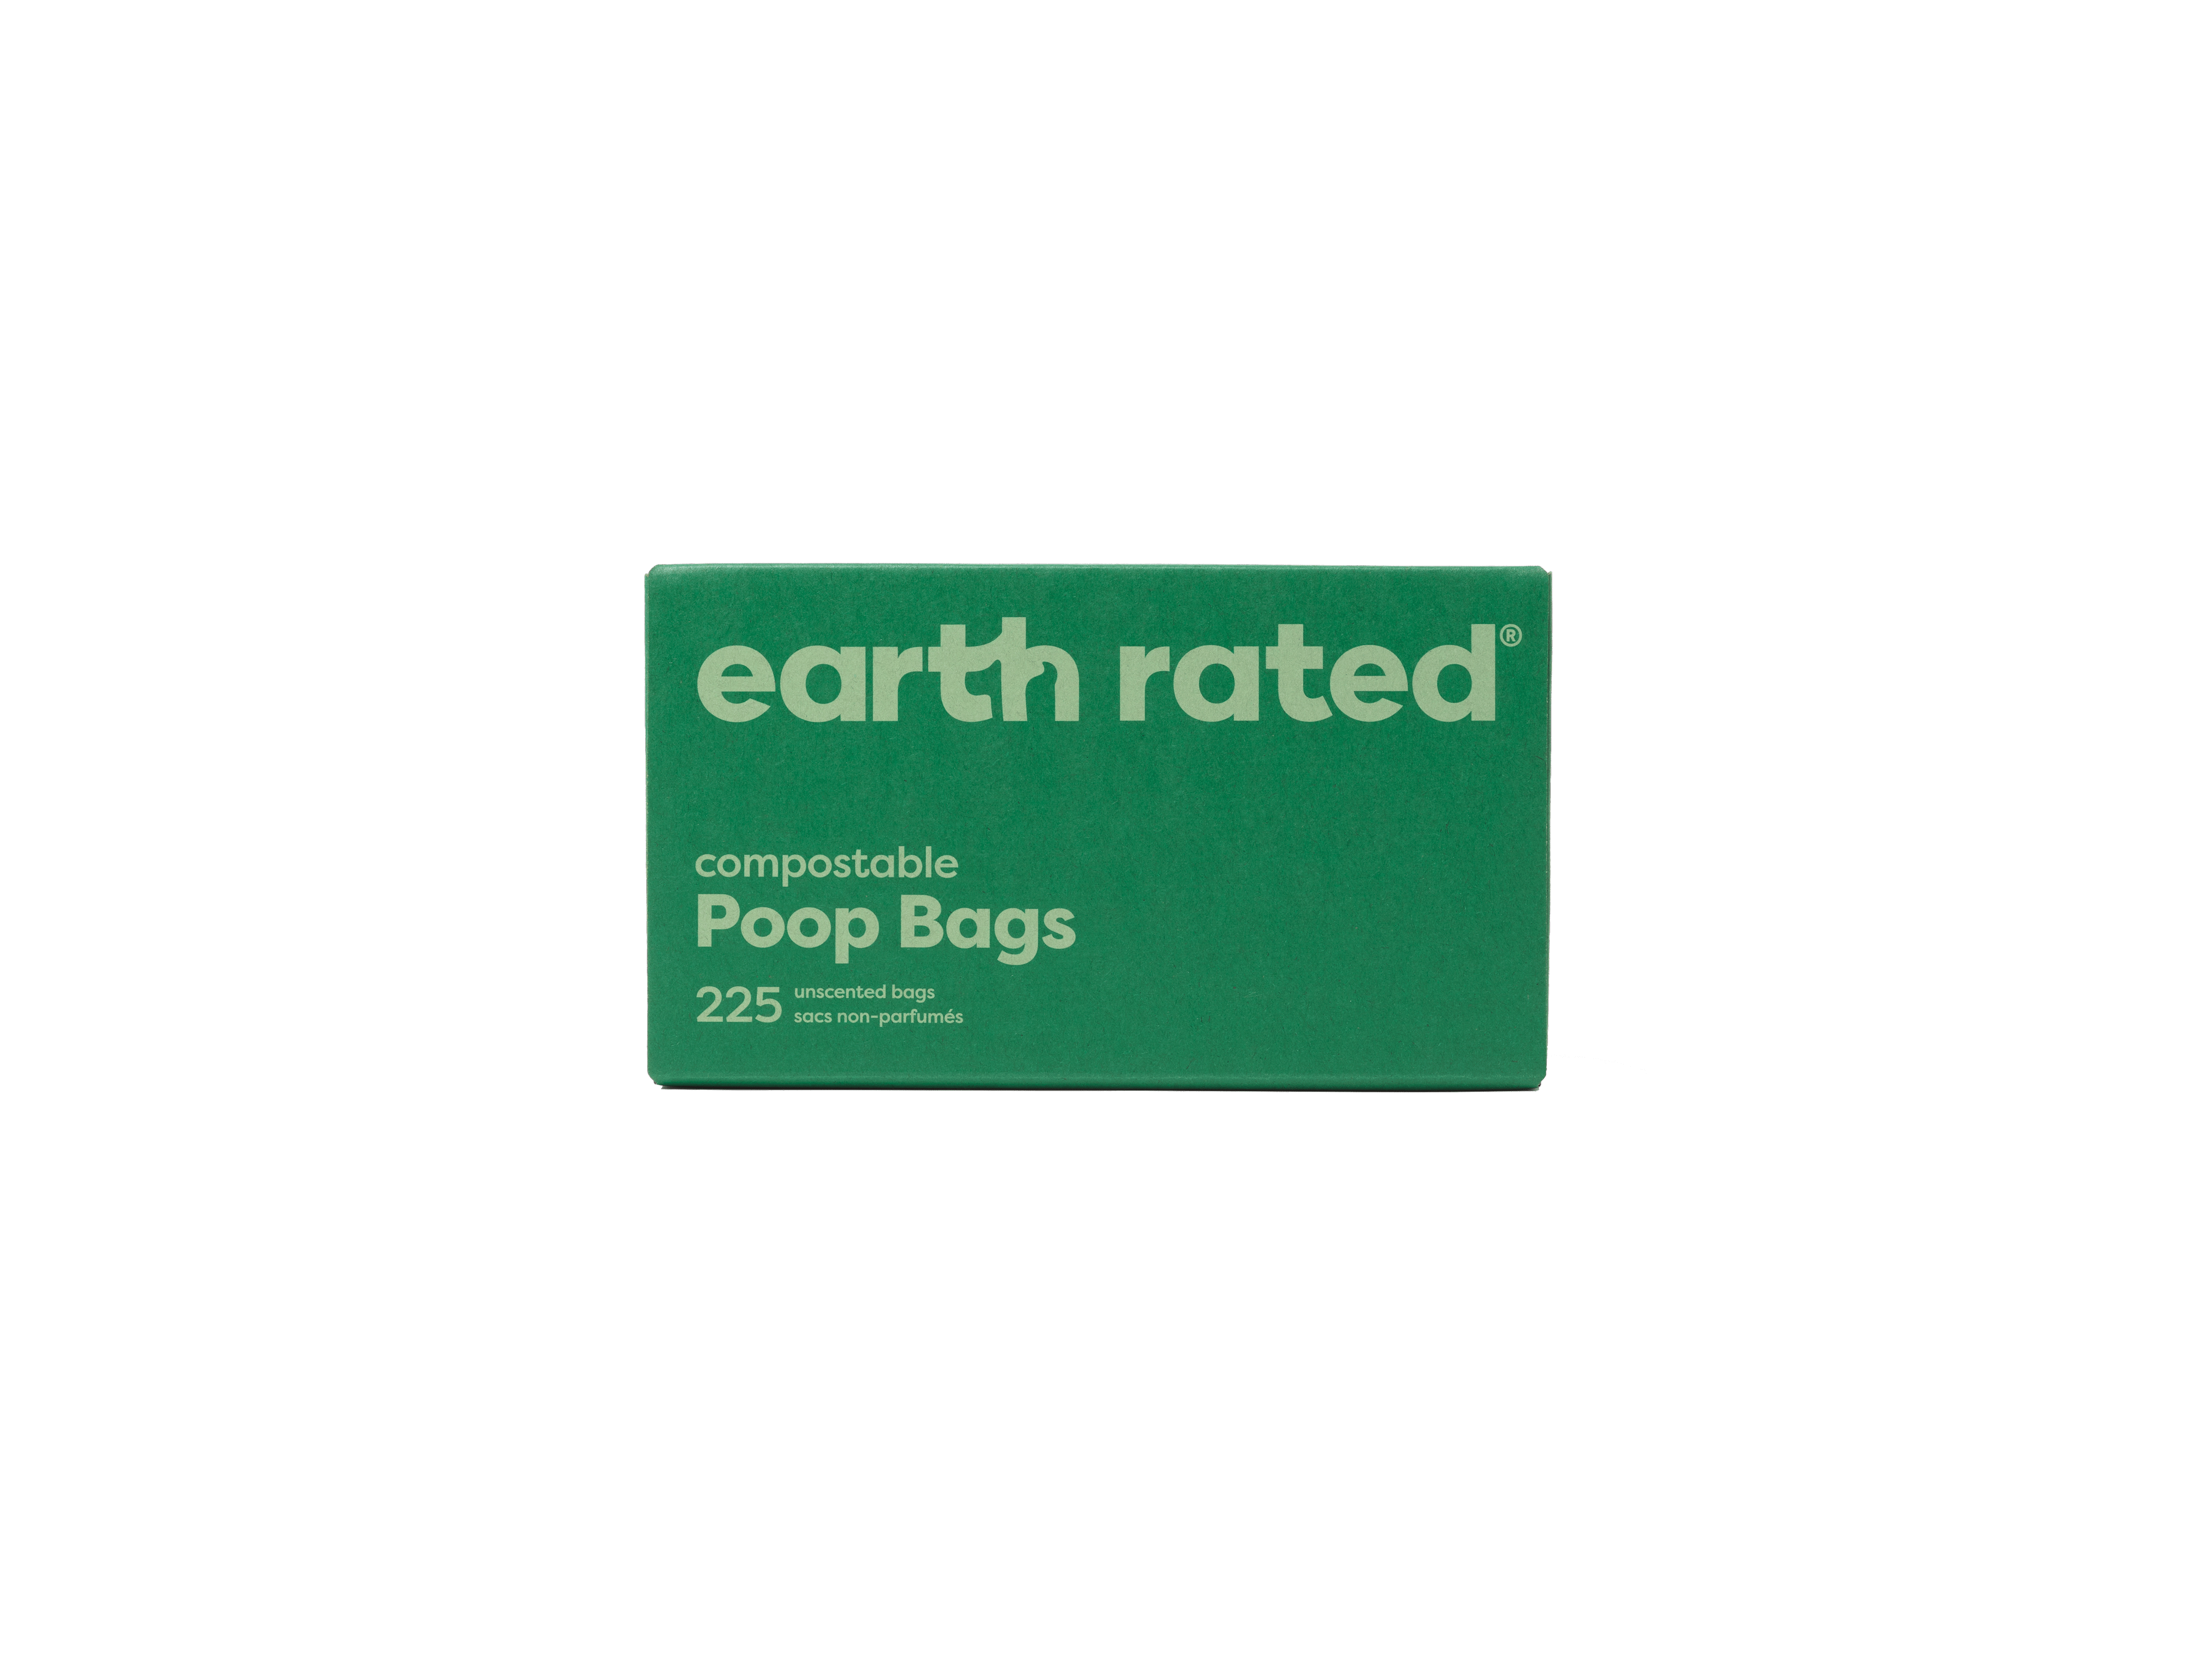 A box of Earth Rated compostable dog poop bags